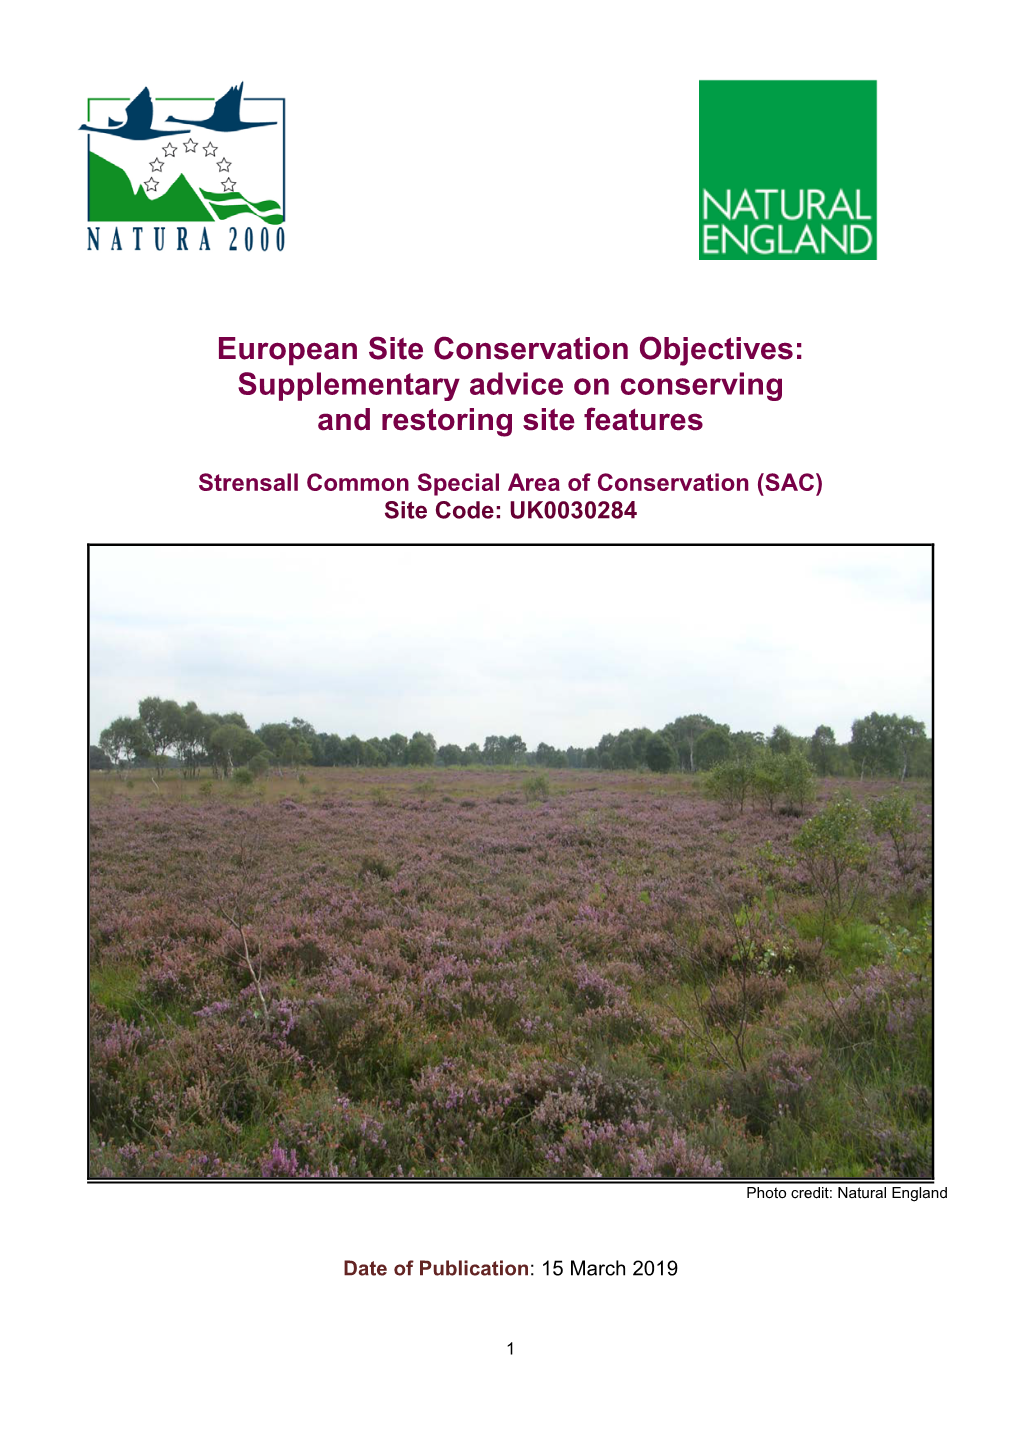 Strensall Common SAC Conservation Objectives Supplementary Advice